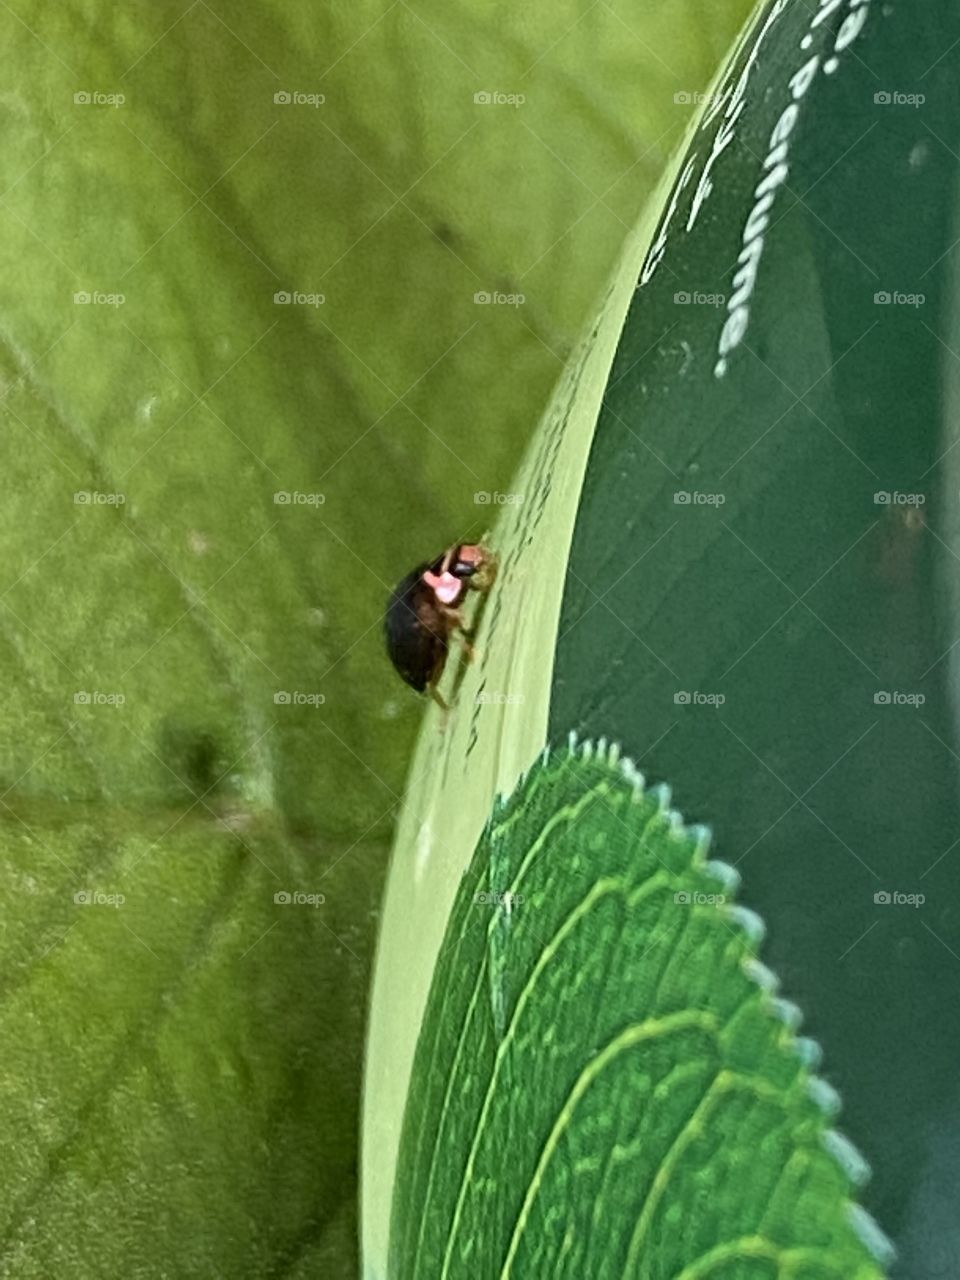 A little insect is walking on a pot